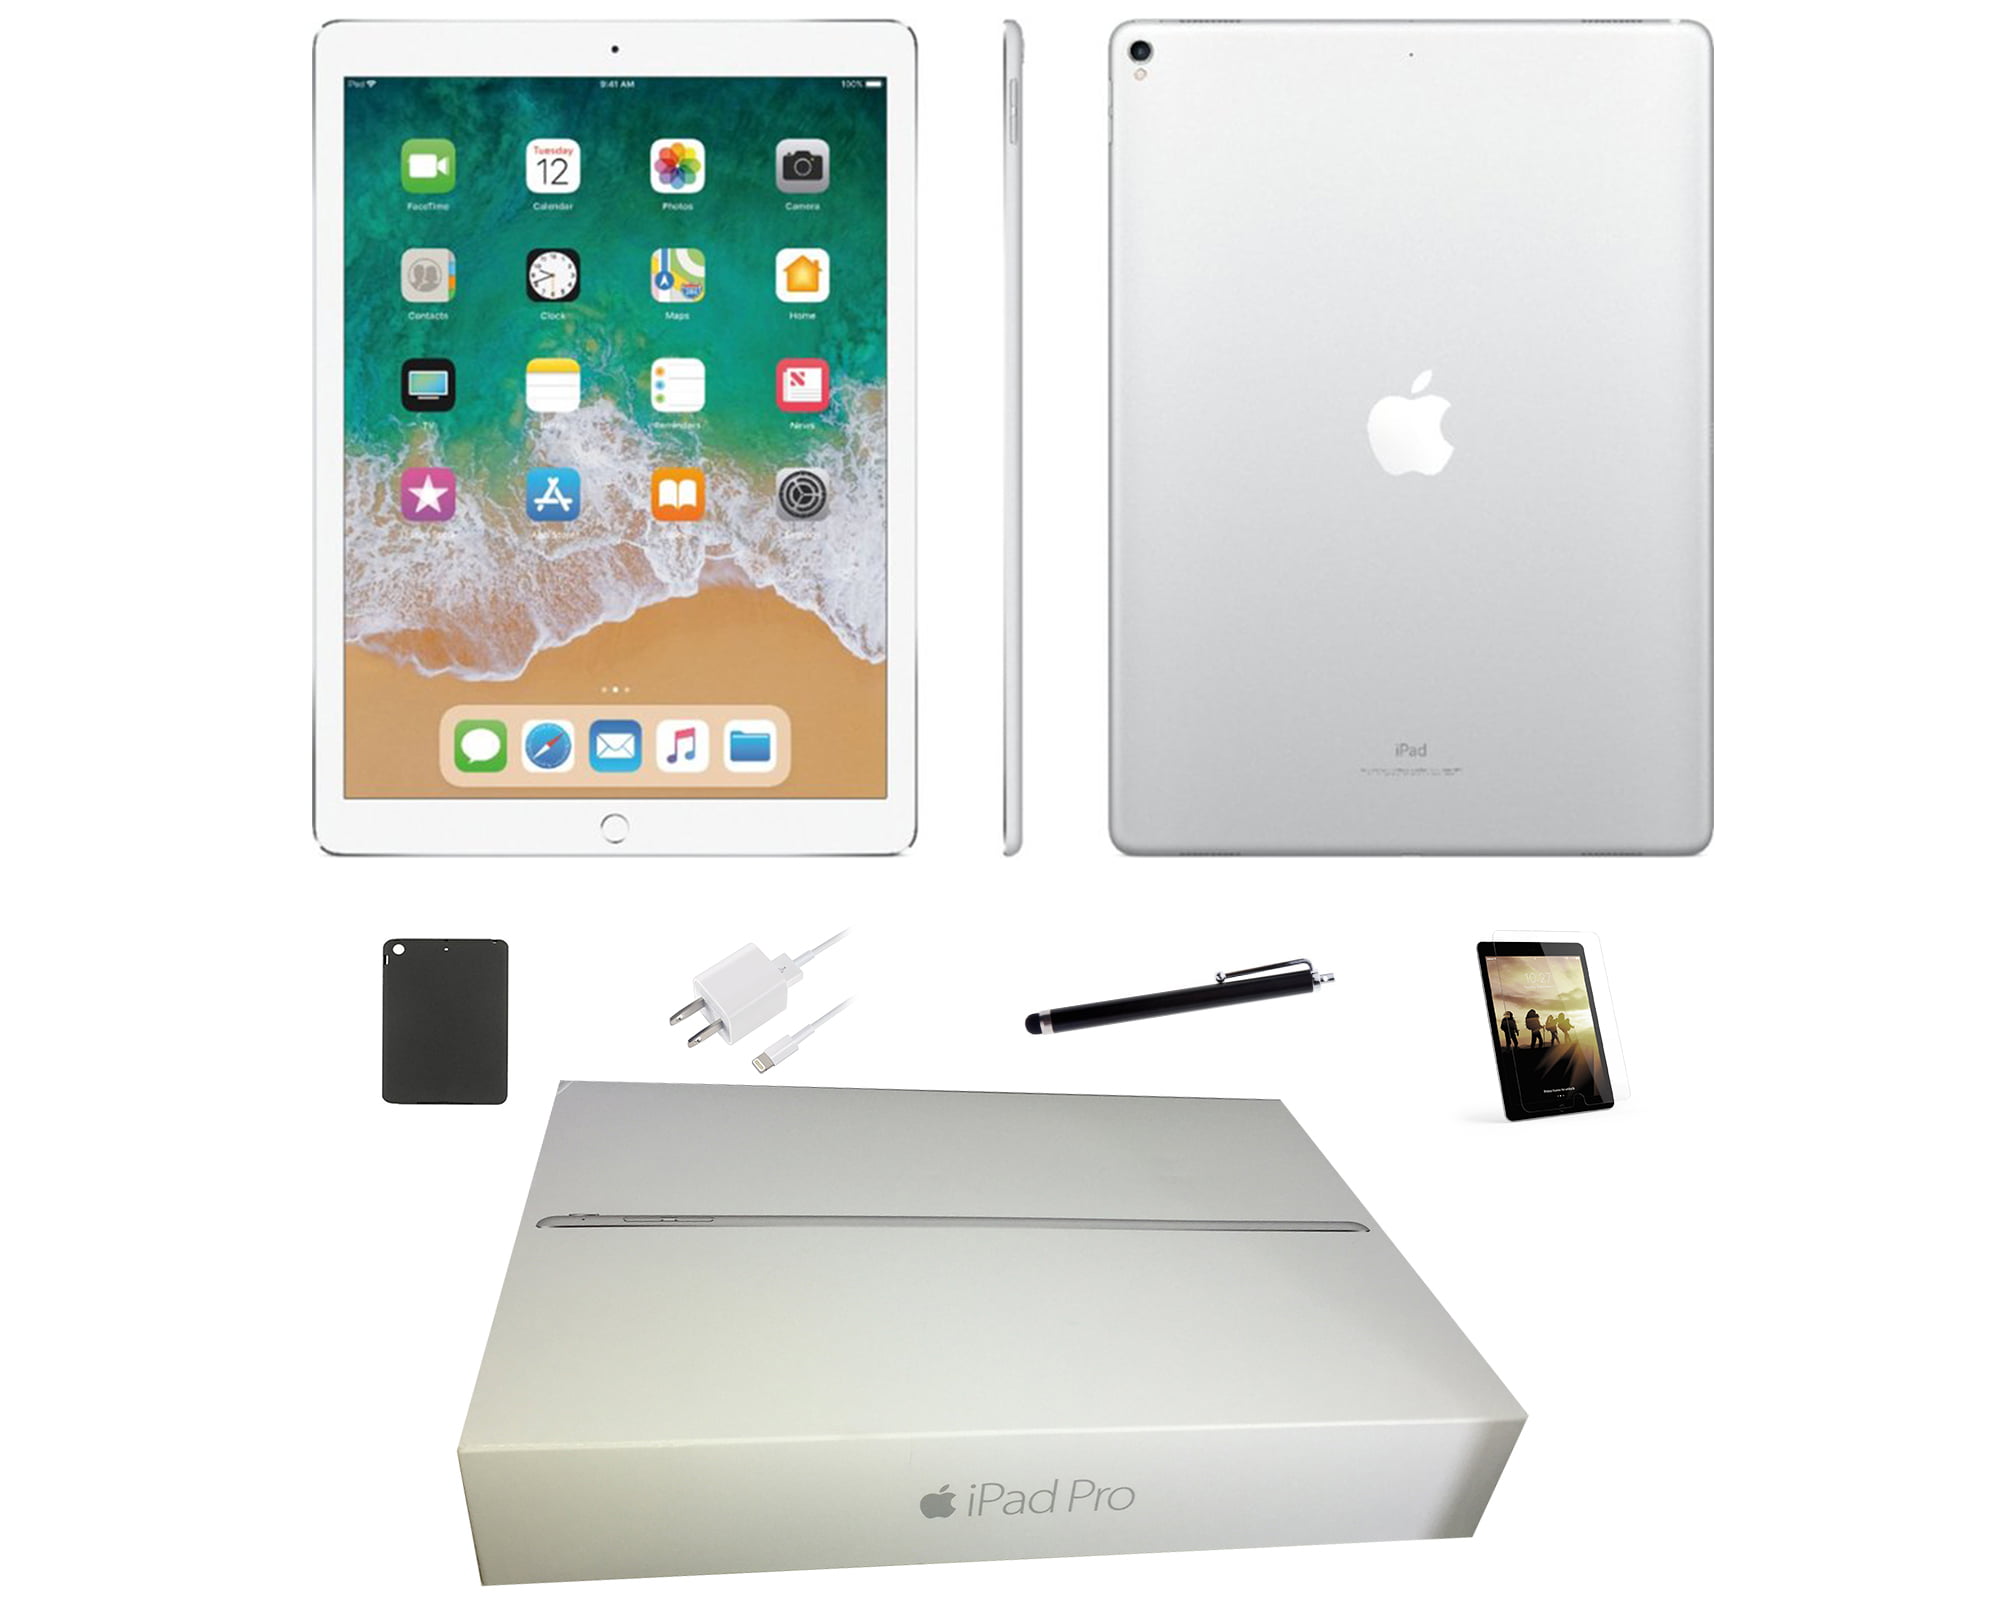 Apple 12.9-Inch Retina Display iPad Pro, Wi-Fi Only, 32GB, Bundle Offer  Includes: Tempered Glass, Case, Rapid Charger, and Stylus Pen, Silver